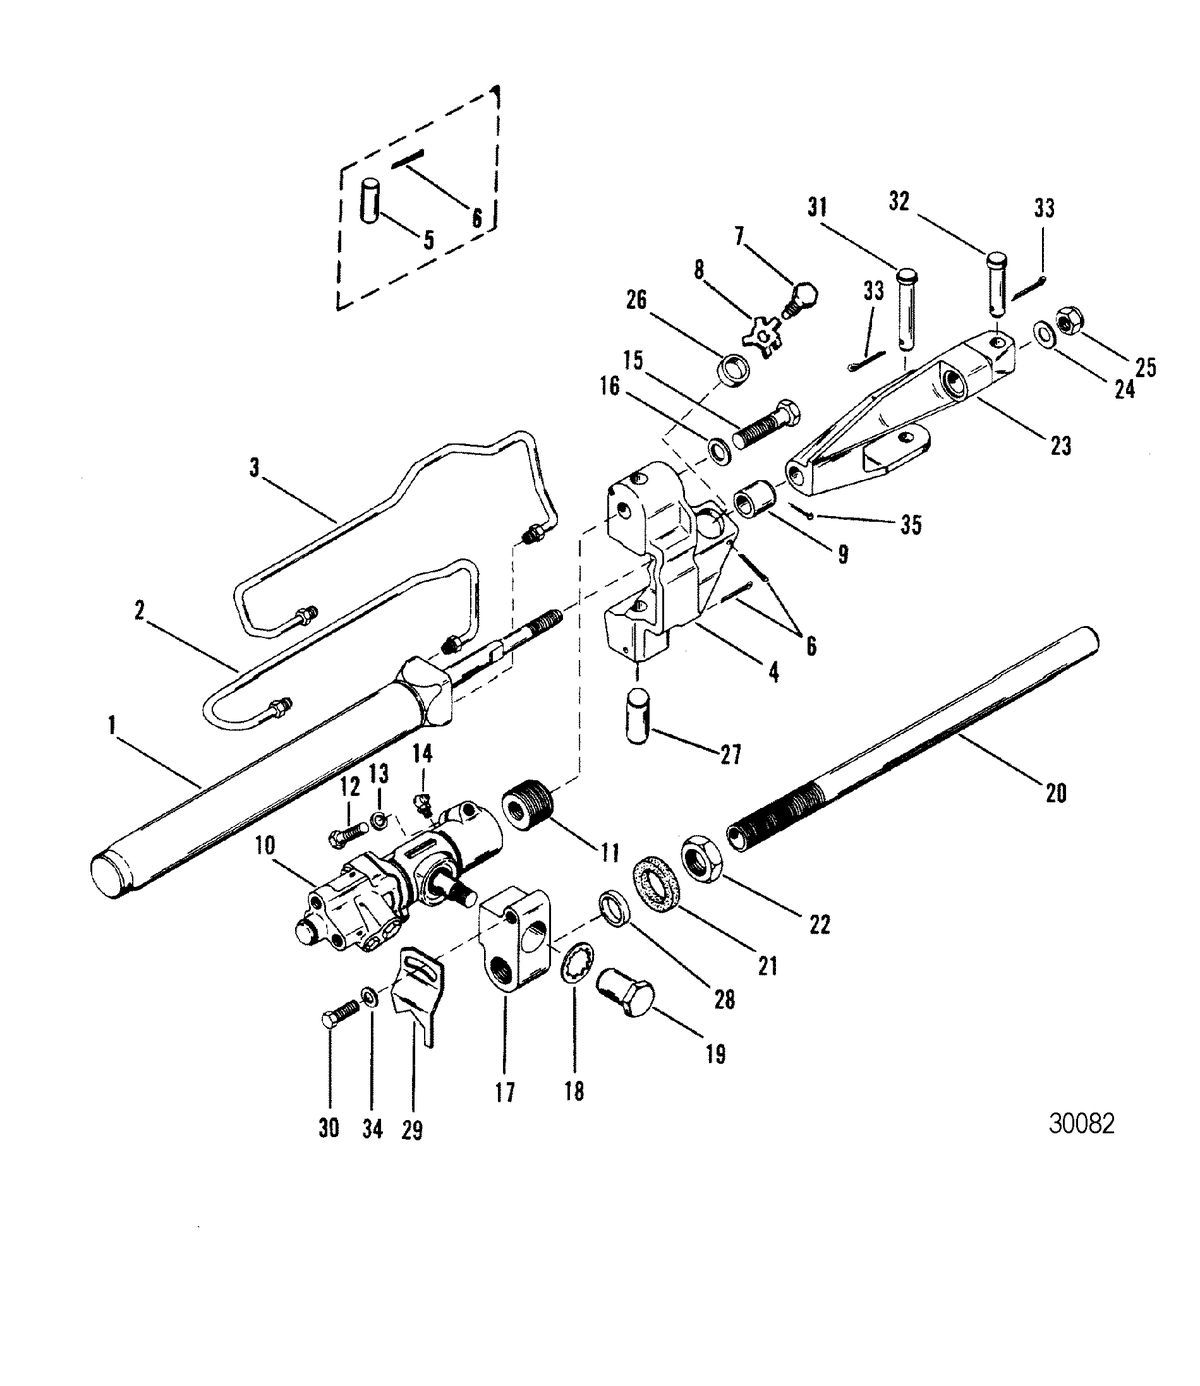 MERCRUISER R/MR ALPHA ONE STERNDRIVE POWER STEERING COMPONENTS